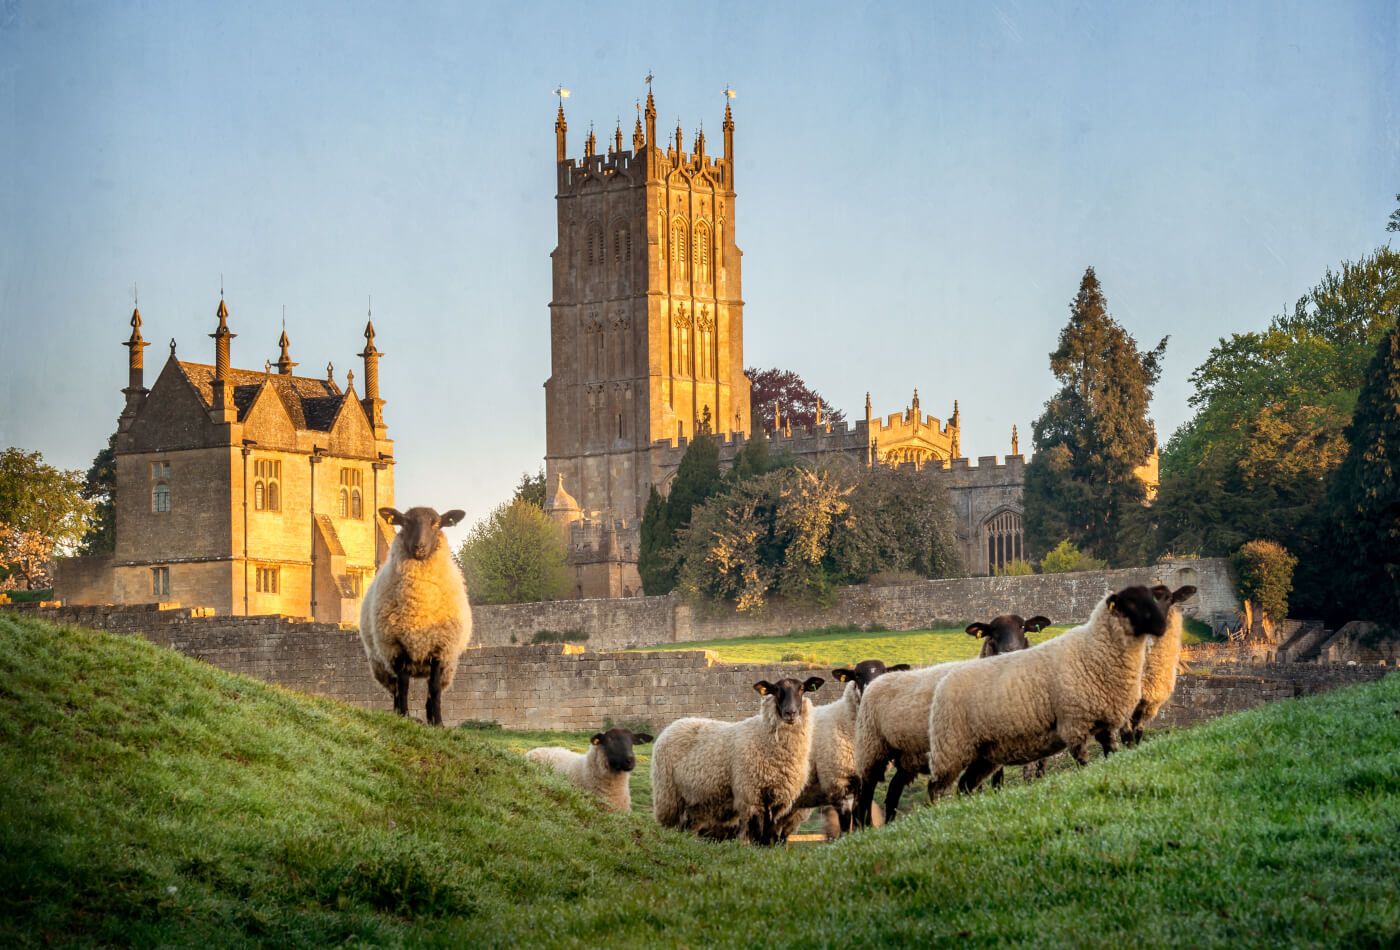 Chipping Camden church with sheep in foreground